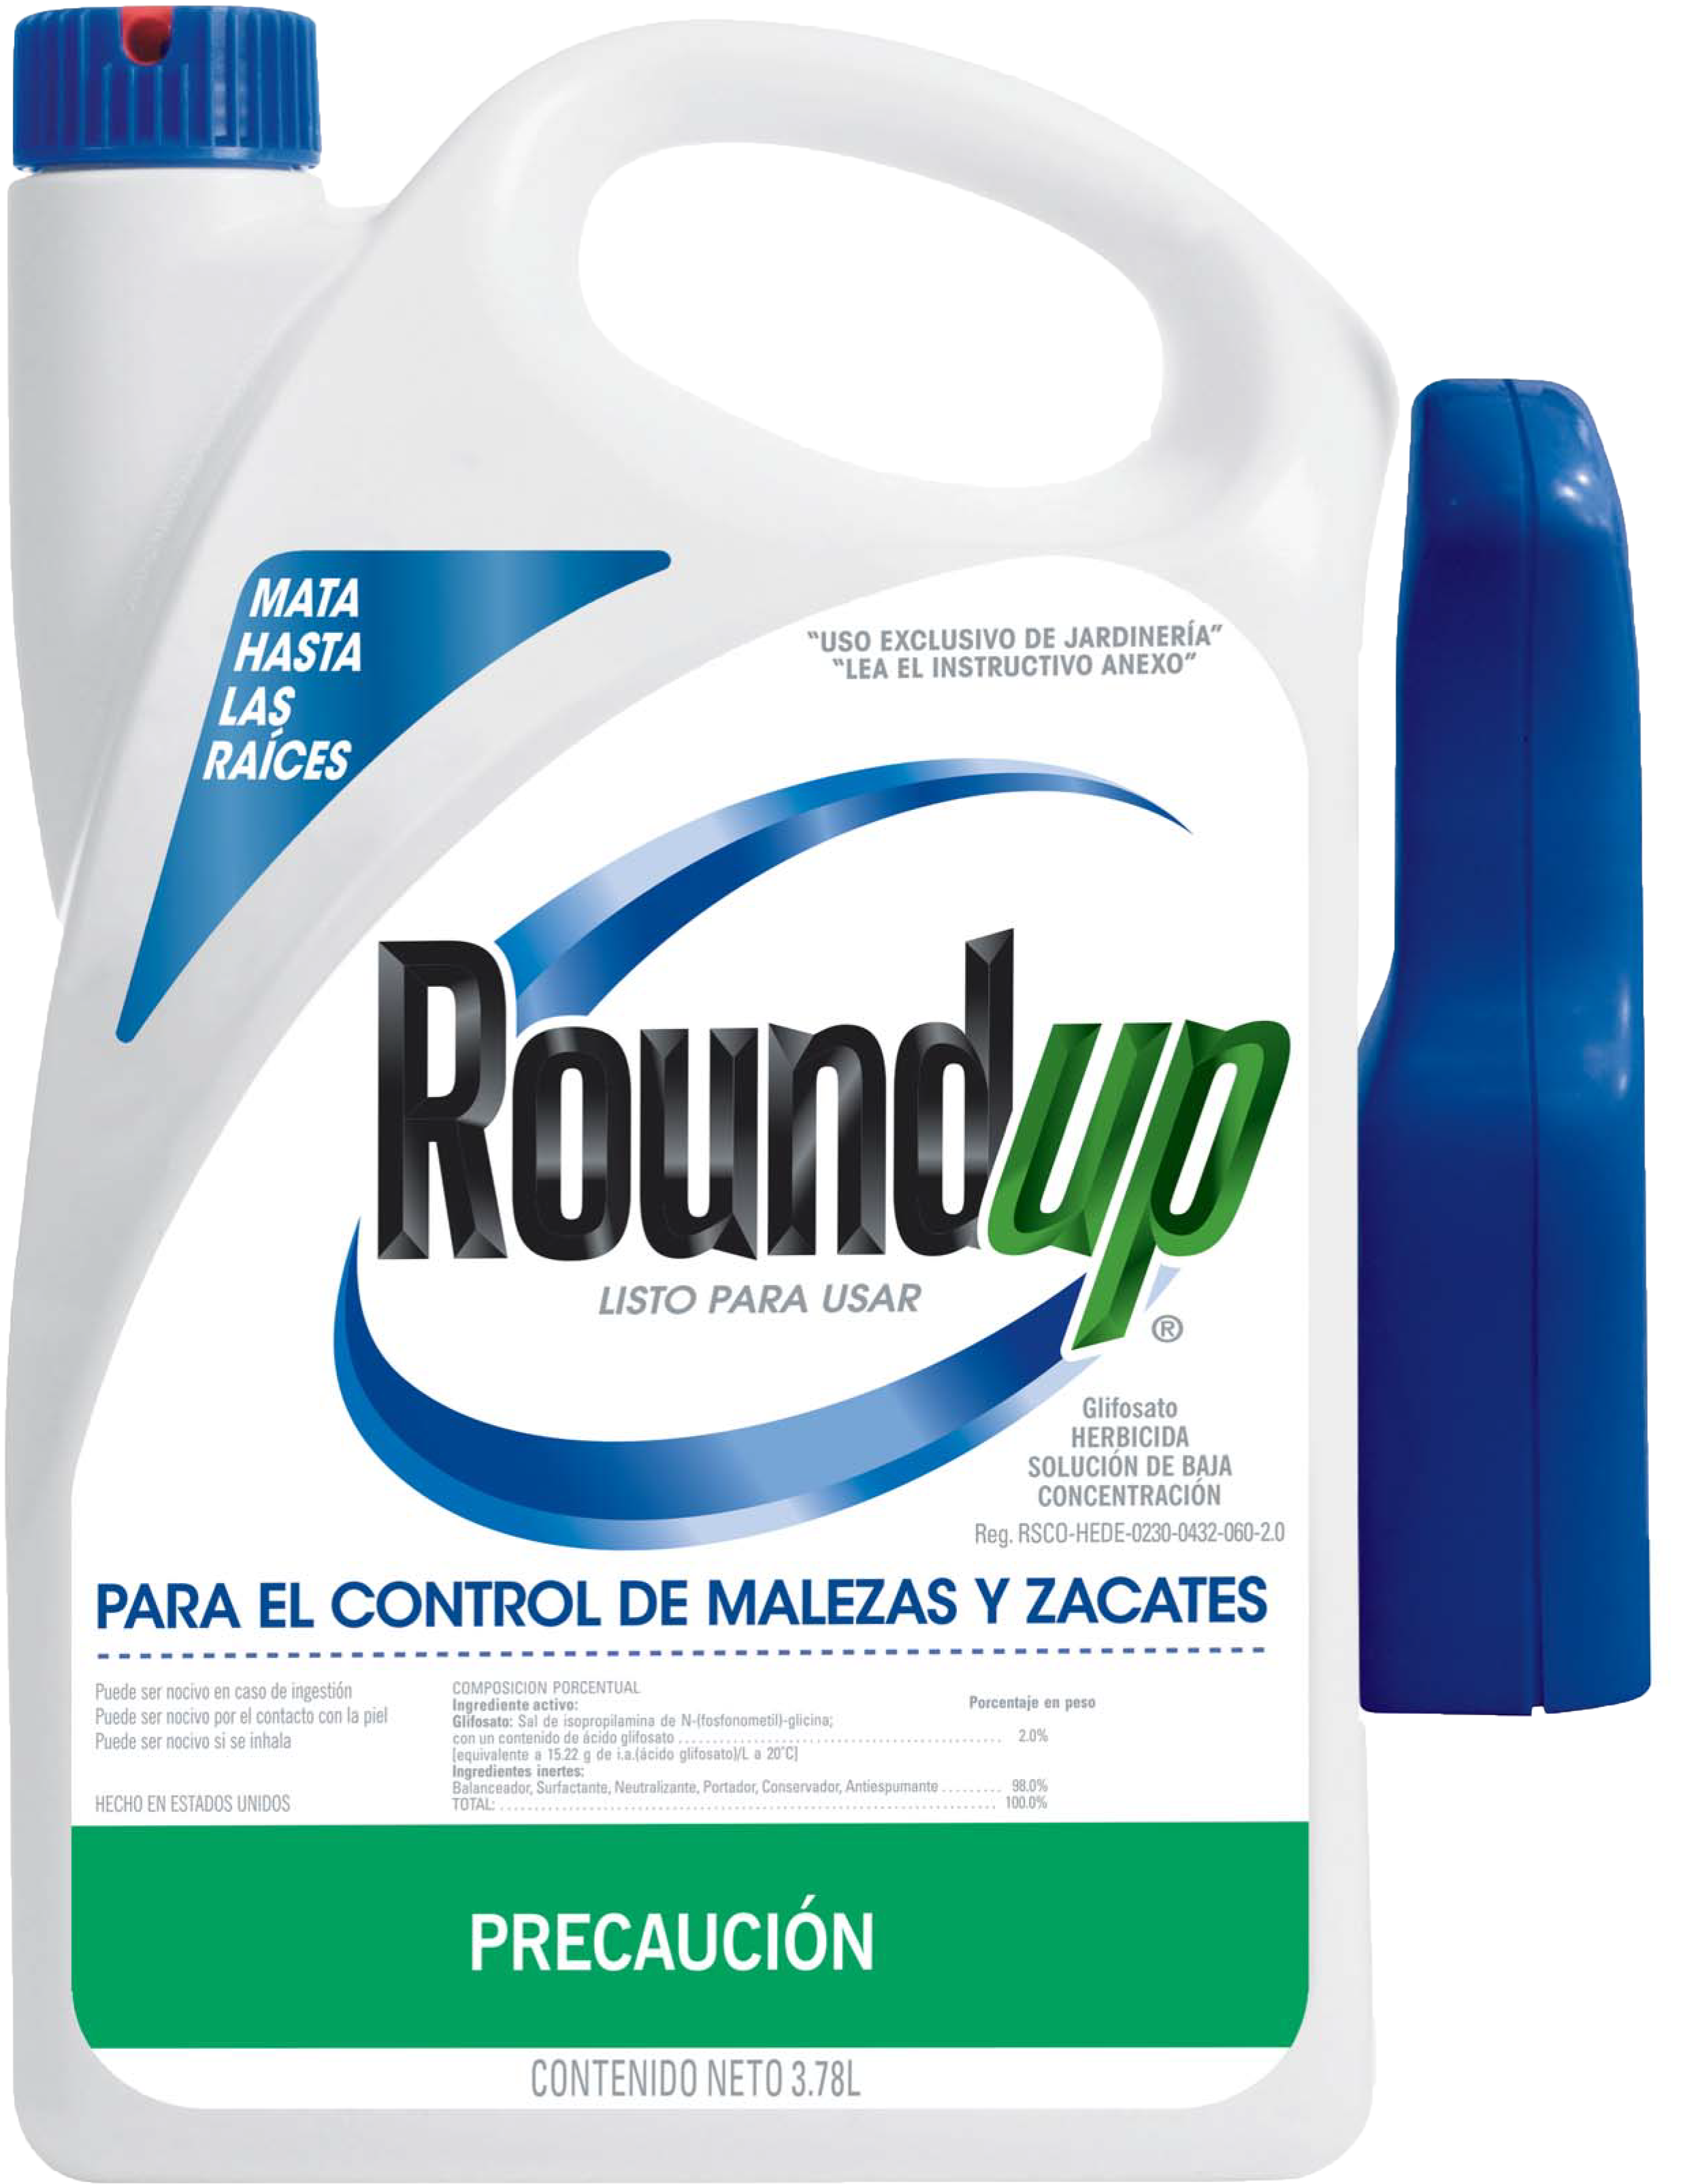 Roundup Wand Png Image With No Background Pngkey